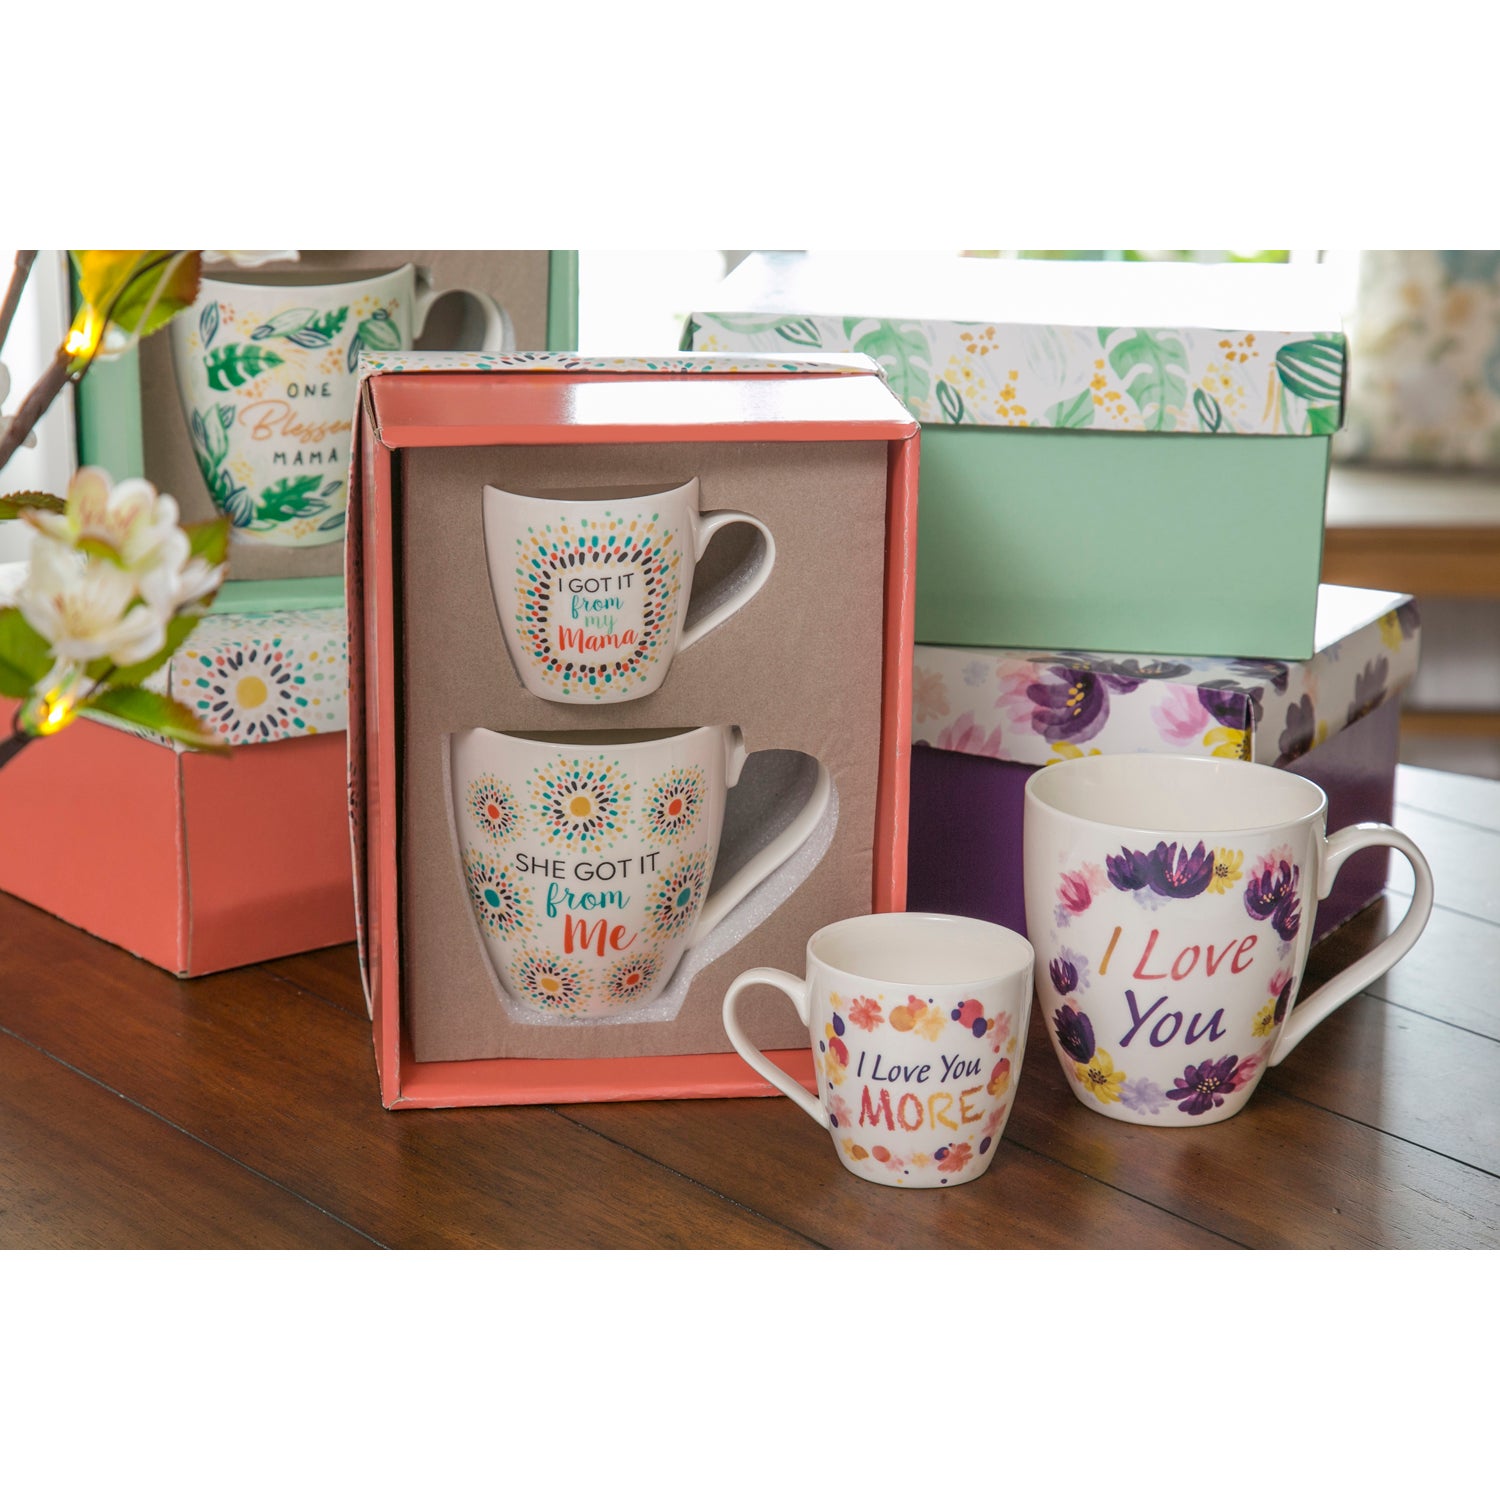 I got it from my Mama Mommy and Me Ceramic Cup Gift Set